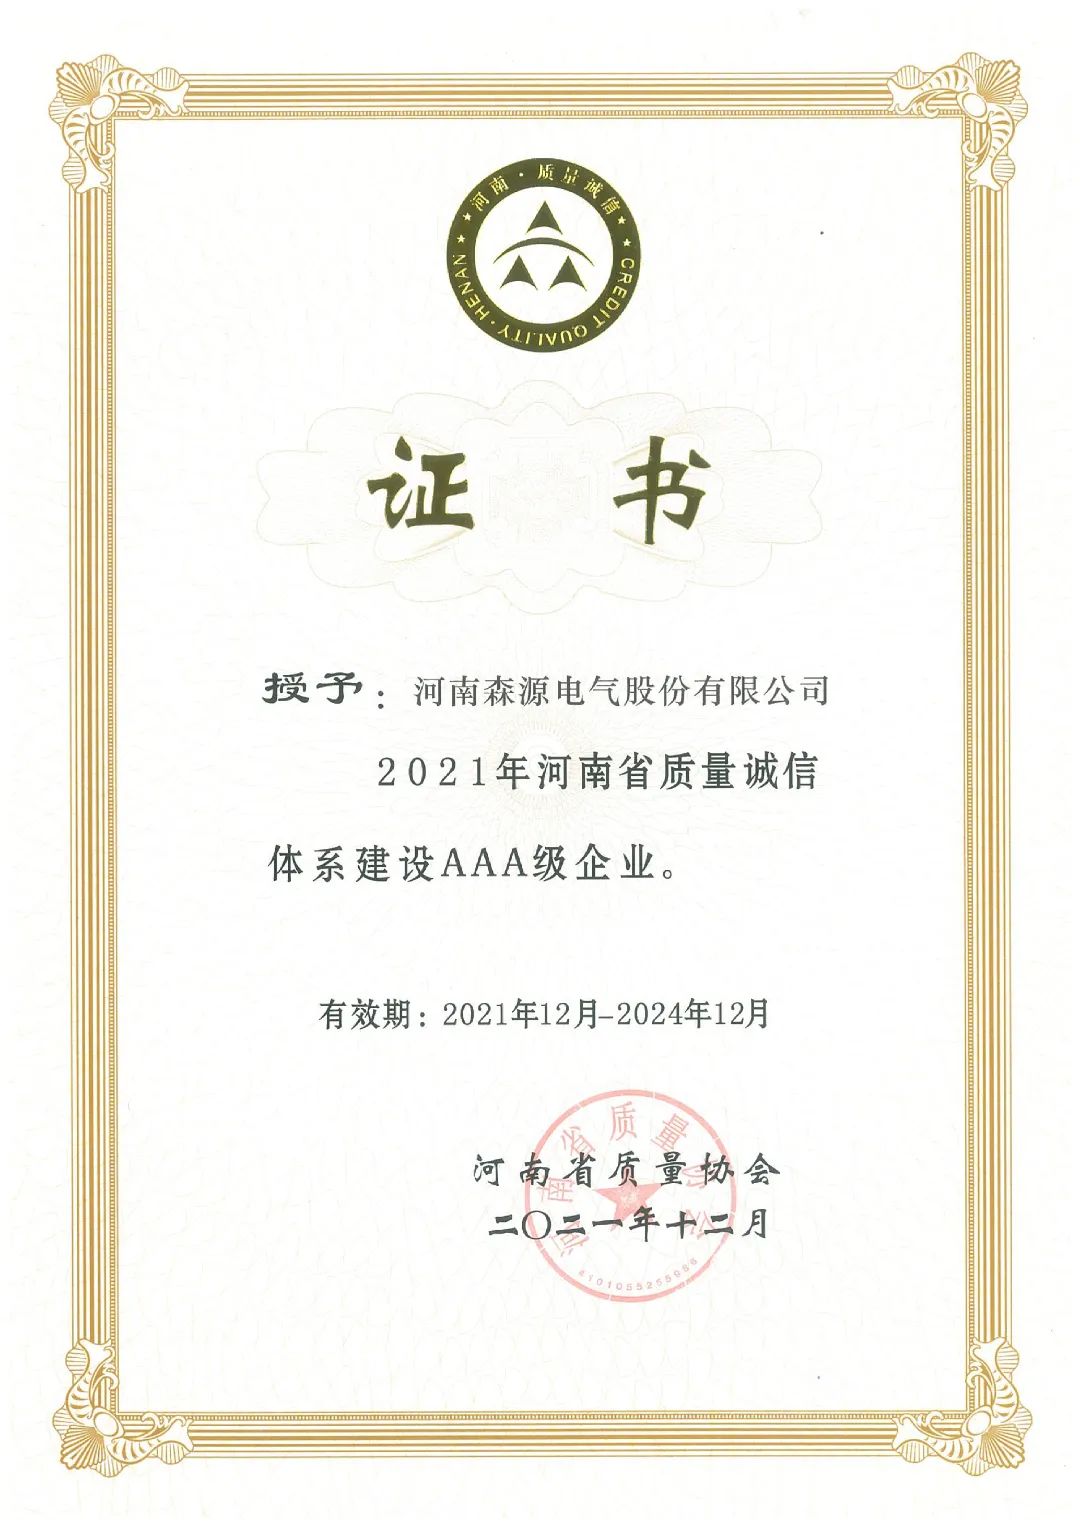 Senyuan Electric was once again rated as an AAA-level enterprise for the construction of quality integrity system in Henan Province